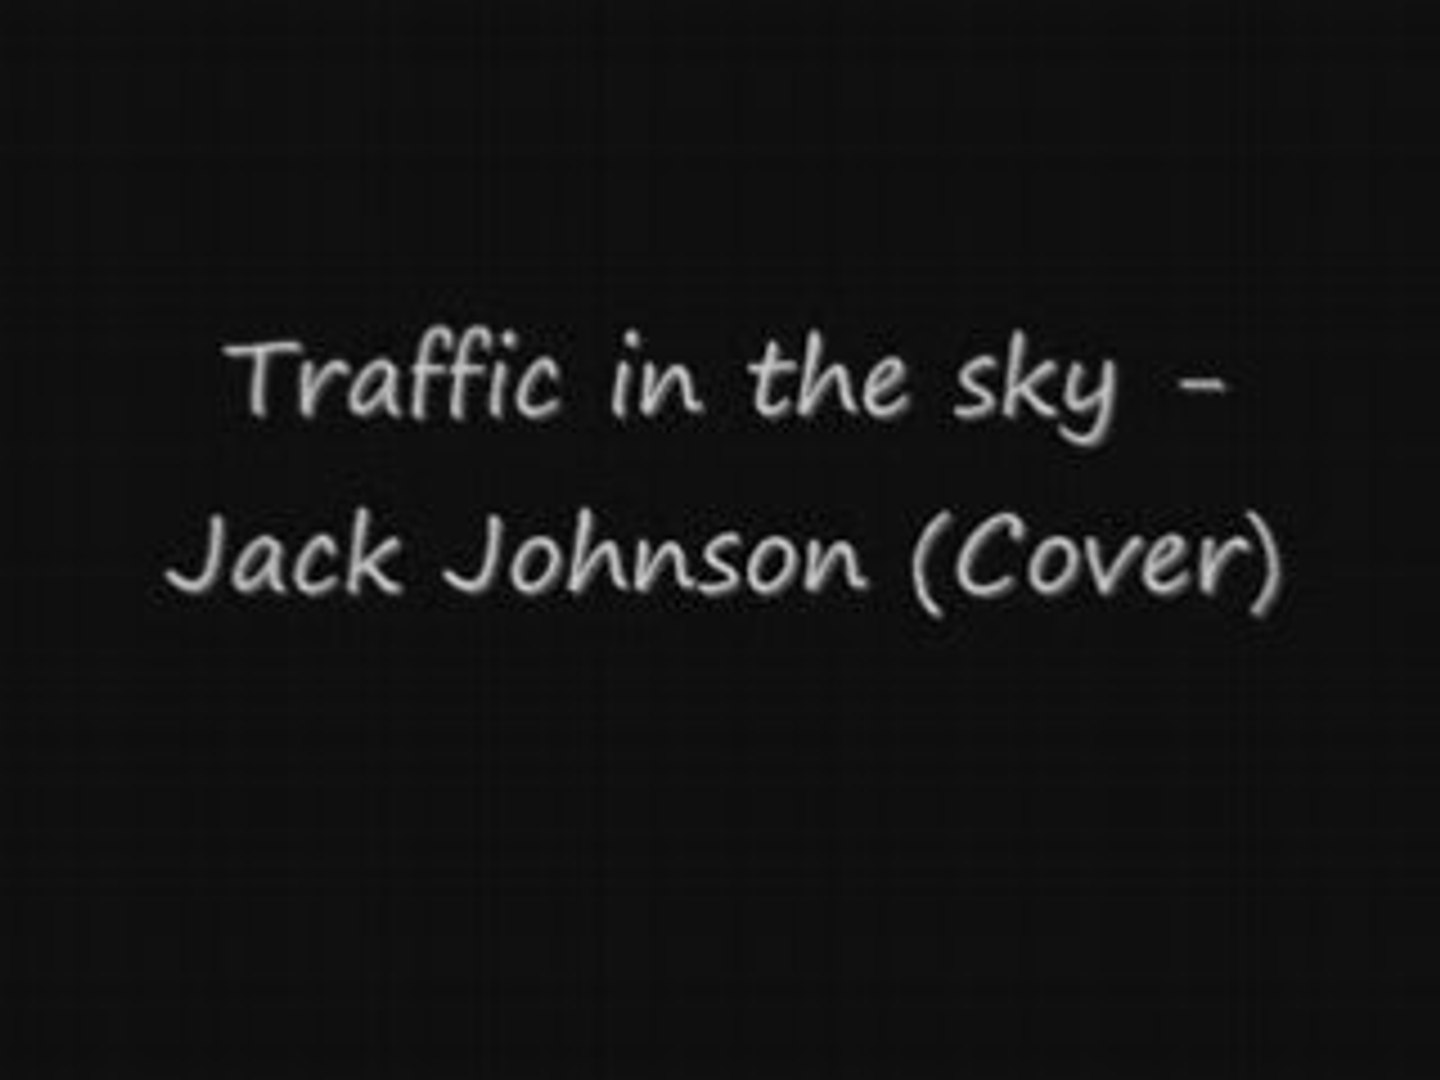 ⁣Jack Johnson - Traffic in the sky (Cover)